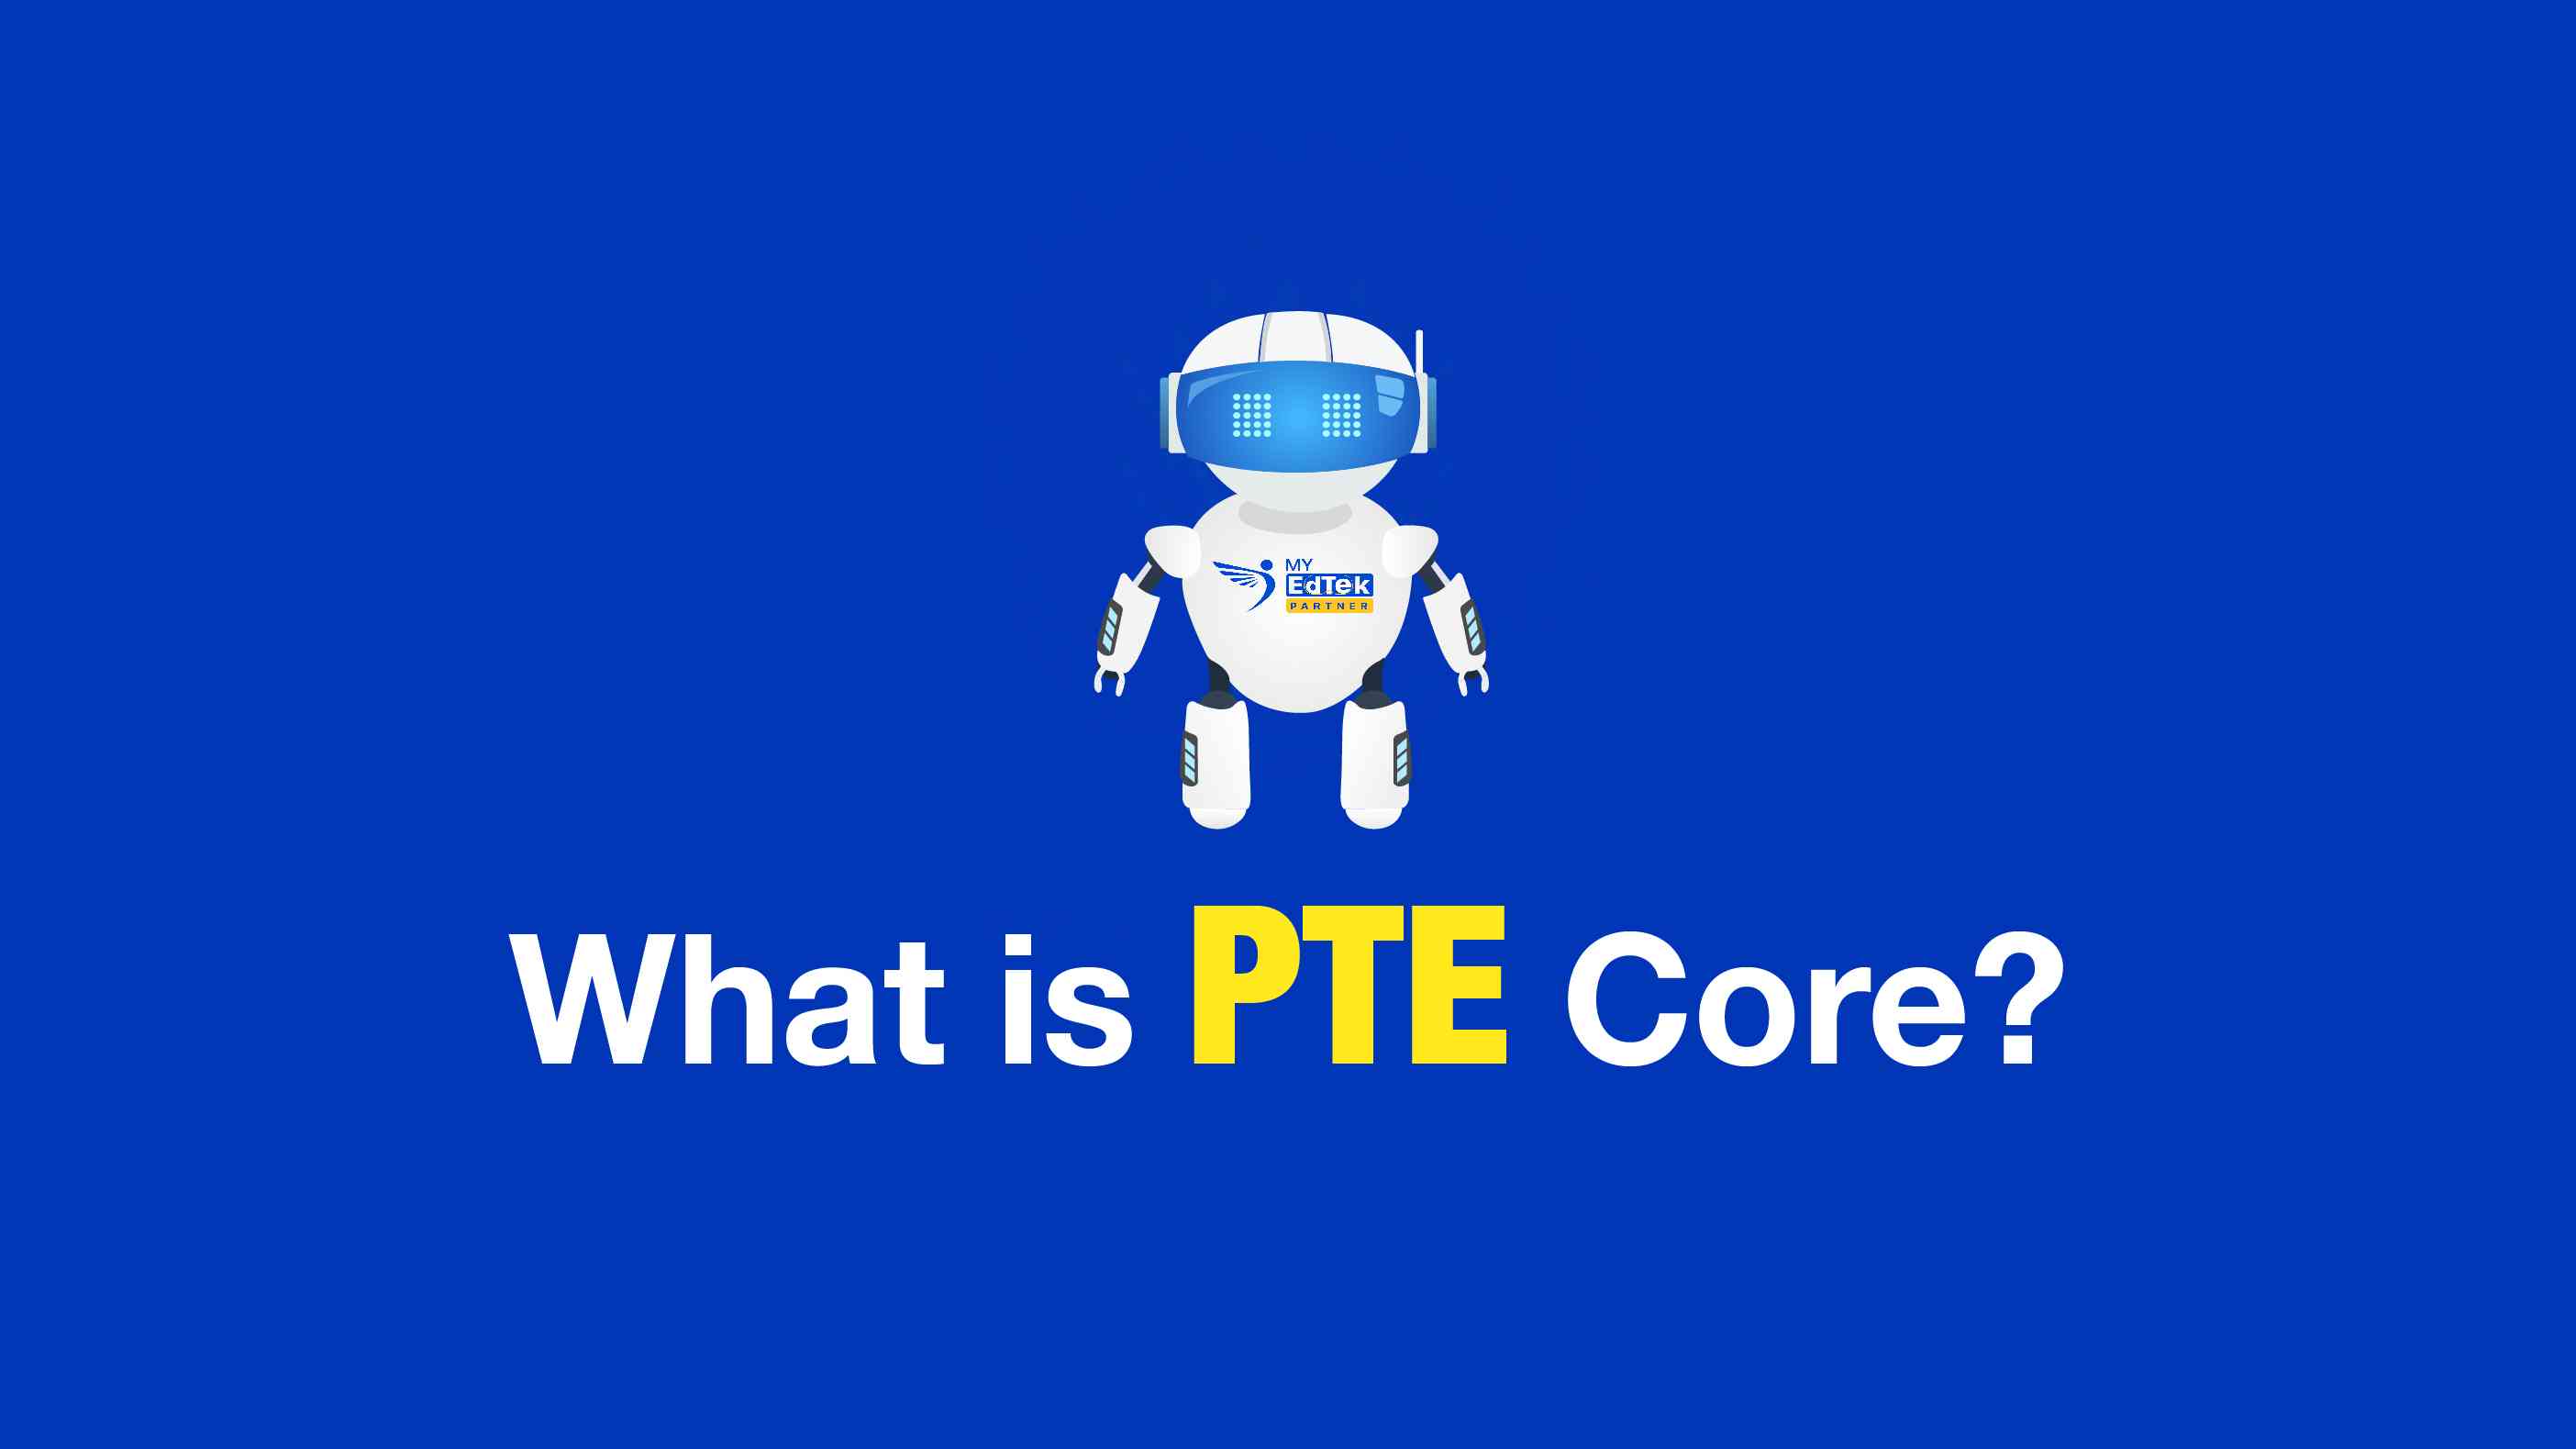 PTE Core: The New Test Option under Pearson Test English